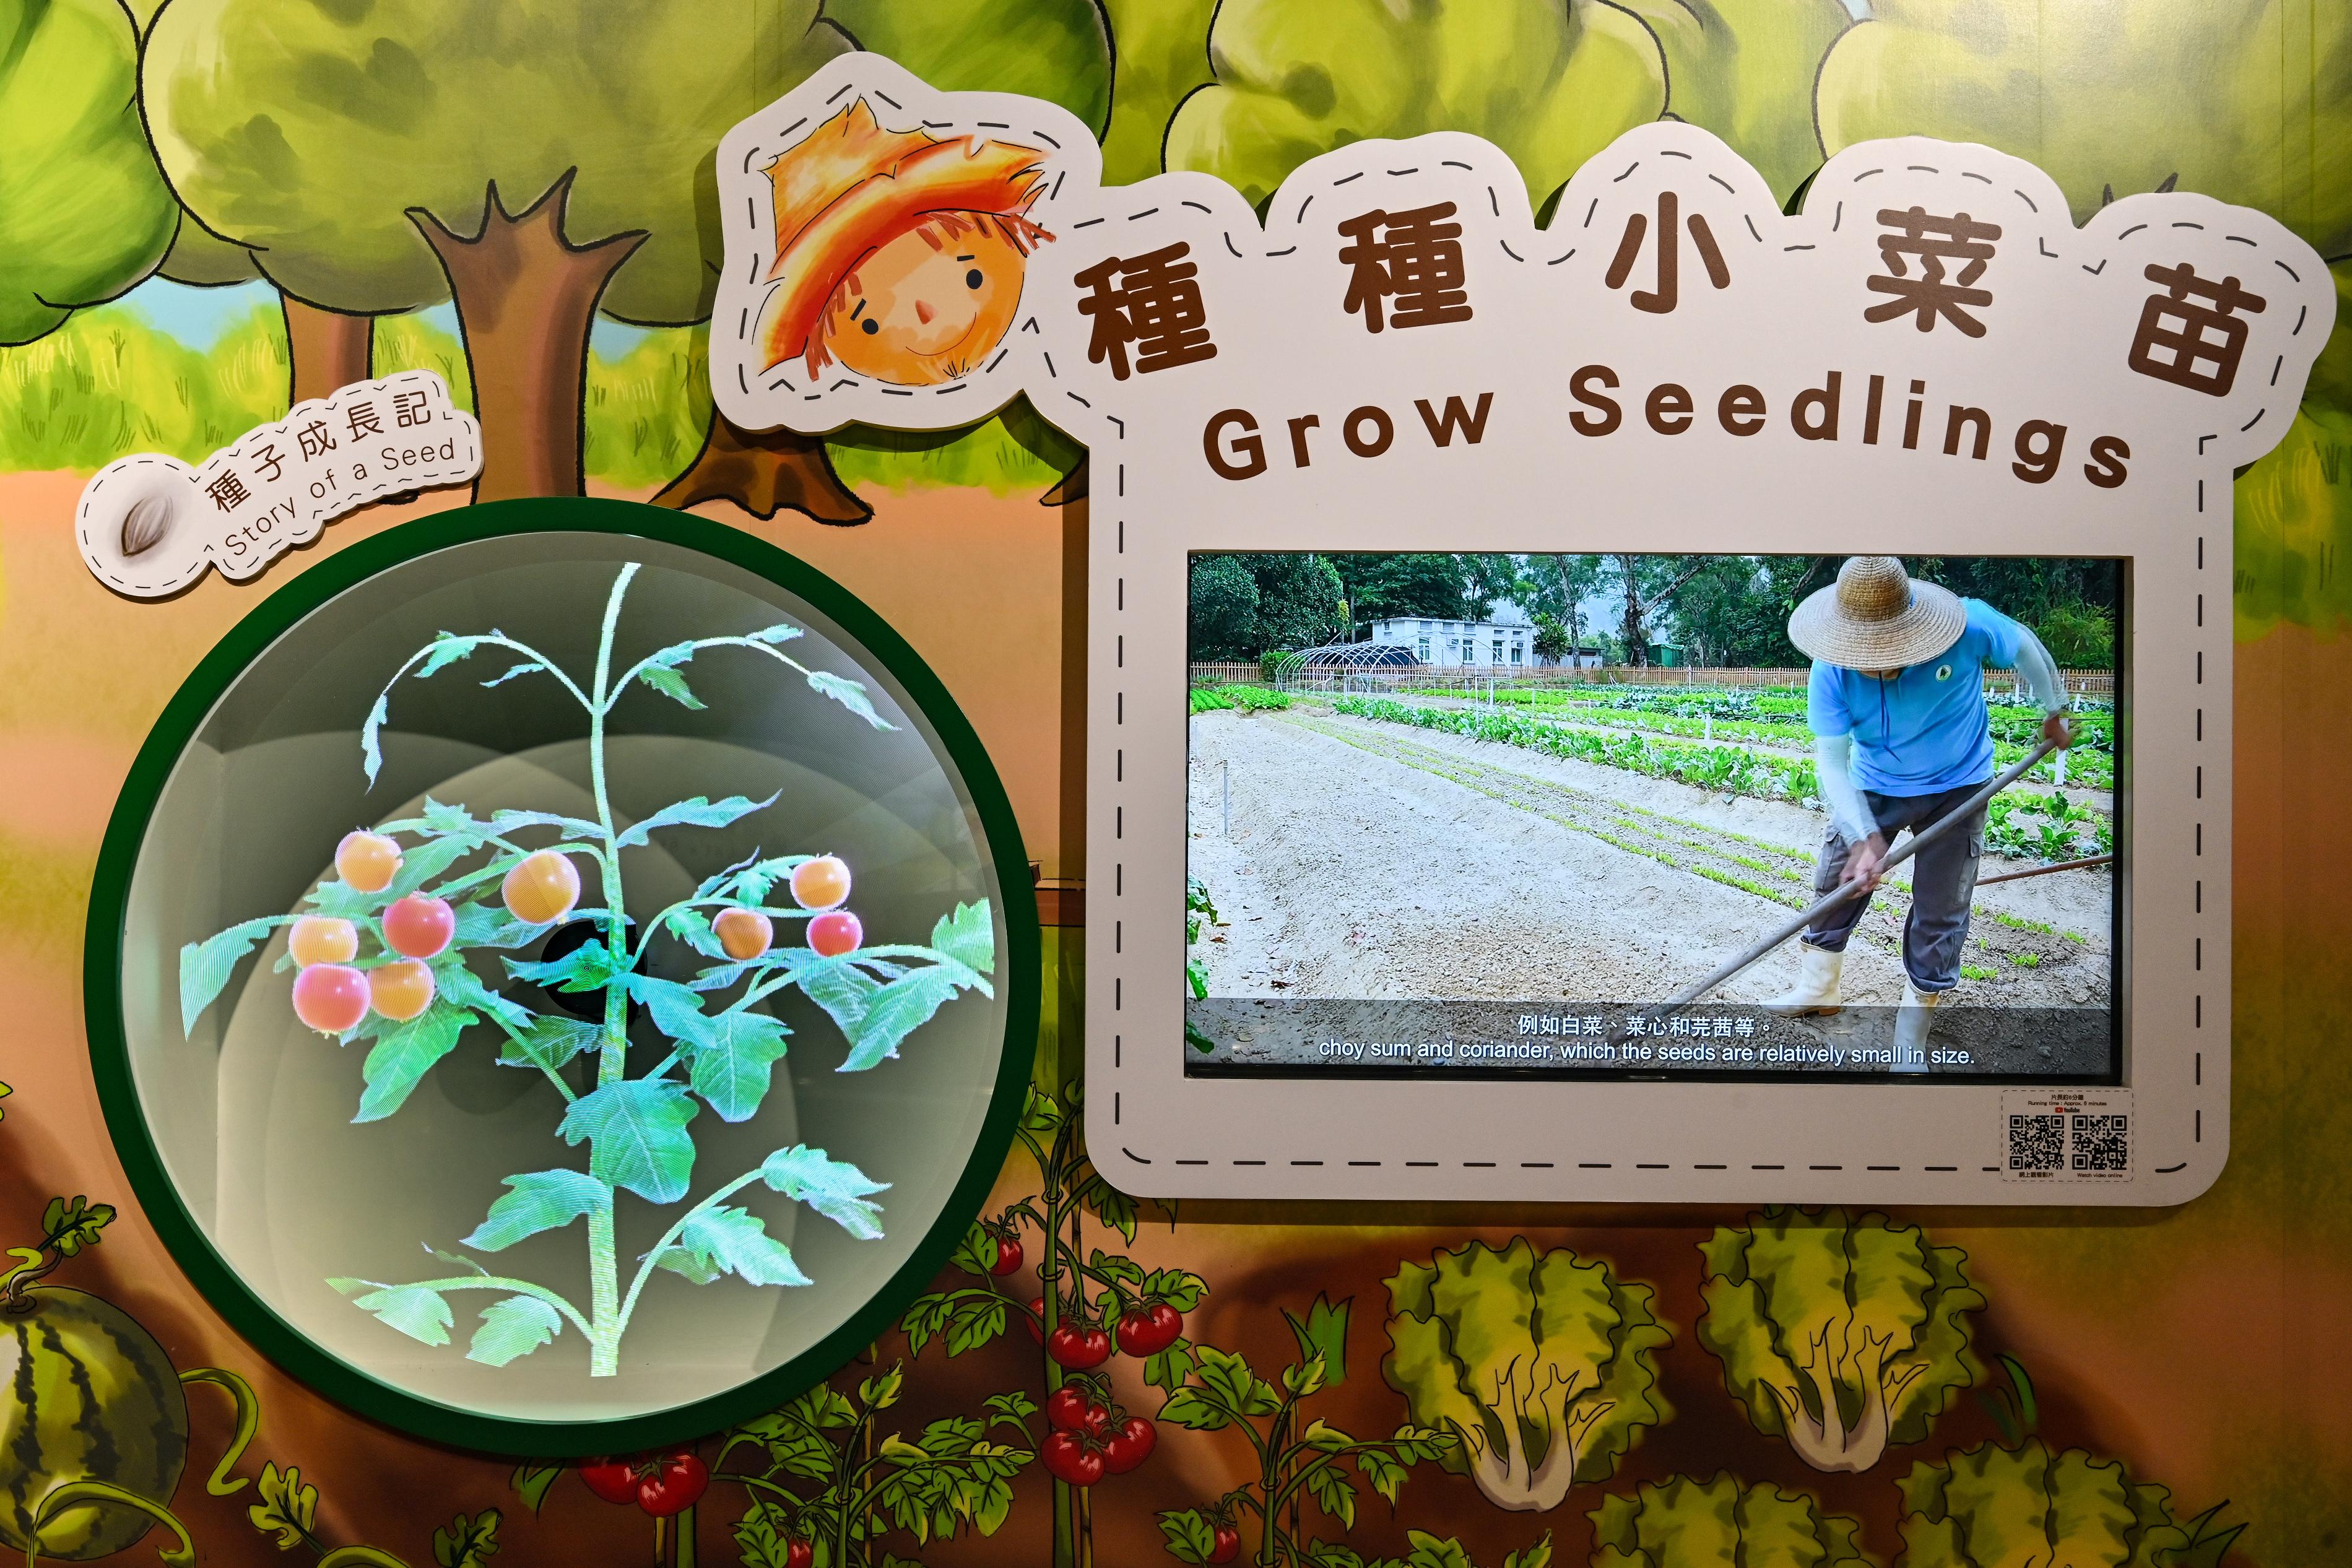 The Agriculture Hall of the Lions Nature Education Centre at Tsiu Hang, Sai Kung, will reopen tomorrow (December 22) upon completion of its revamping. Photo shows one of the exhibits, "Story of a seed", which showcases the whole process of tomato planting (including sowing seeds, growth of seedlings and harvesting) step by step to visitors by using a hologram technique.